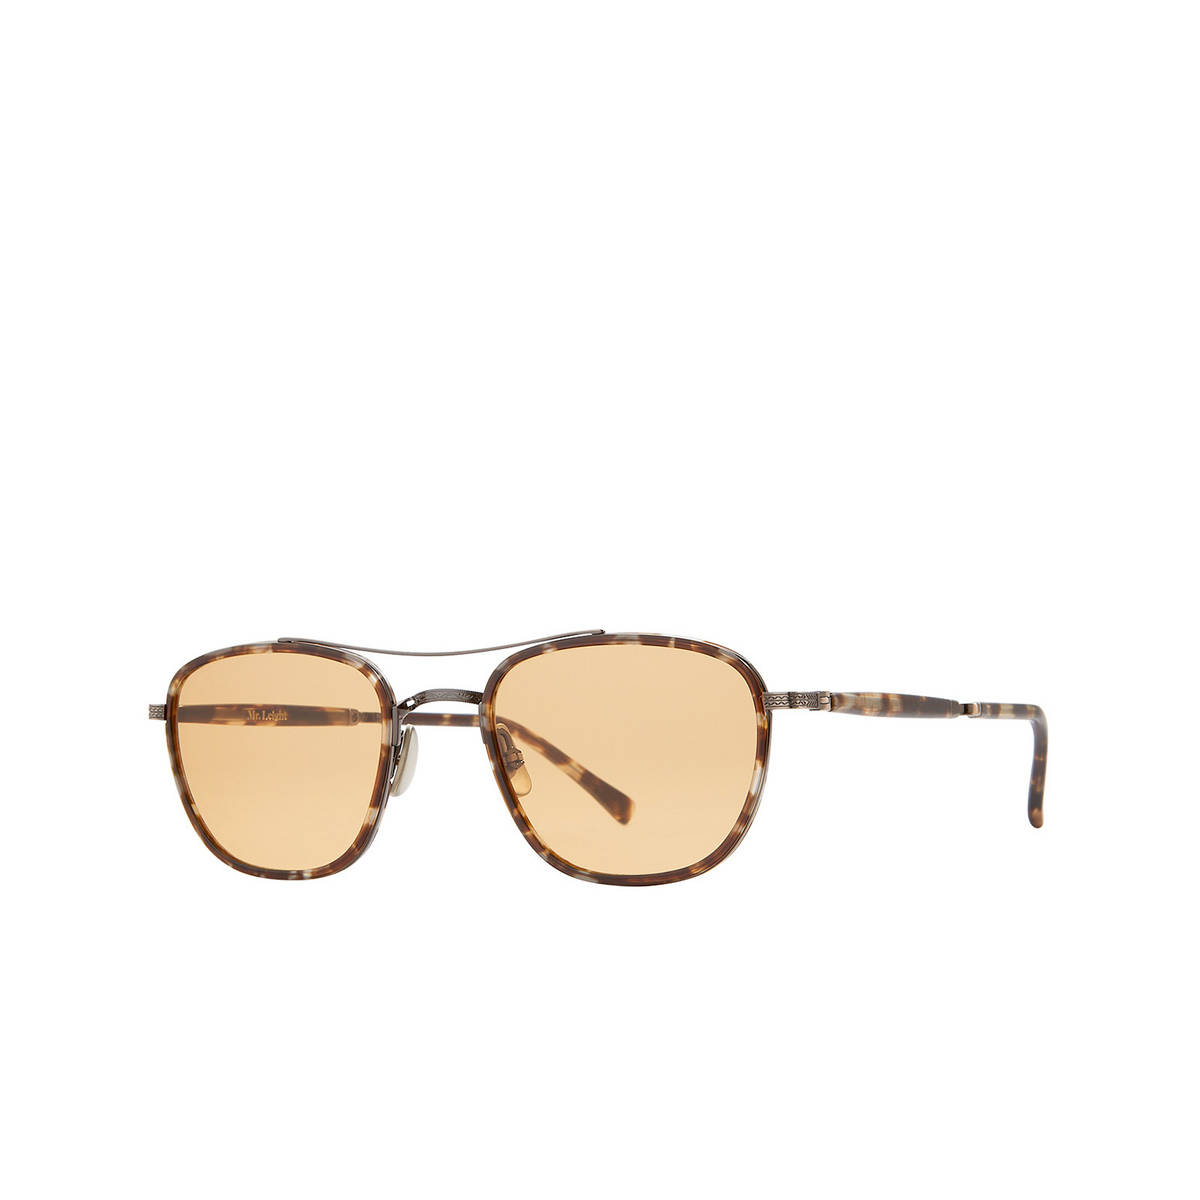 Mr. Leight PRICE S Sunglasses MLPT-ATG/PMP Rose Clay-12K White Gold - three-quarters view